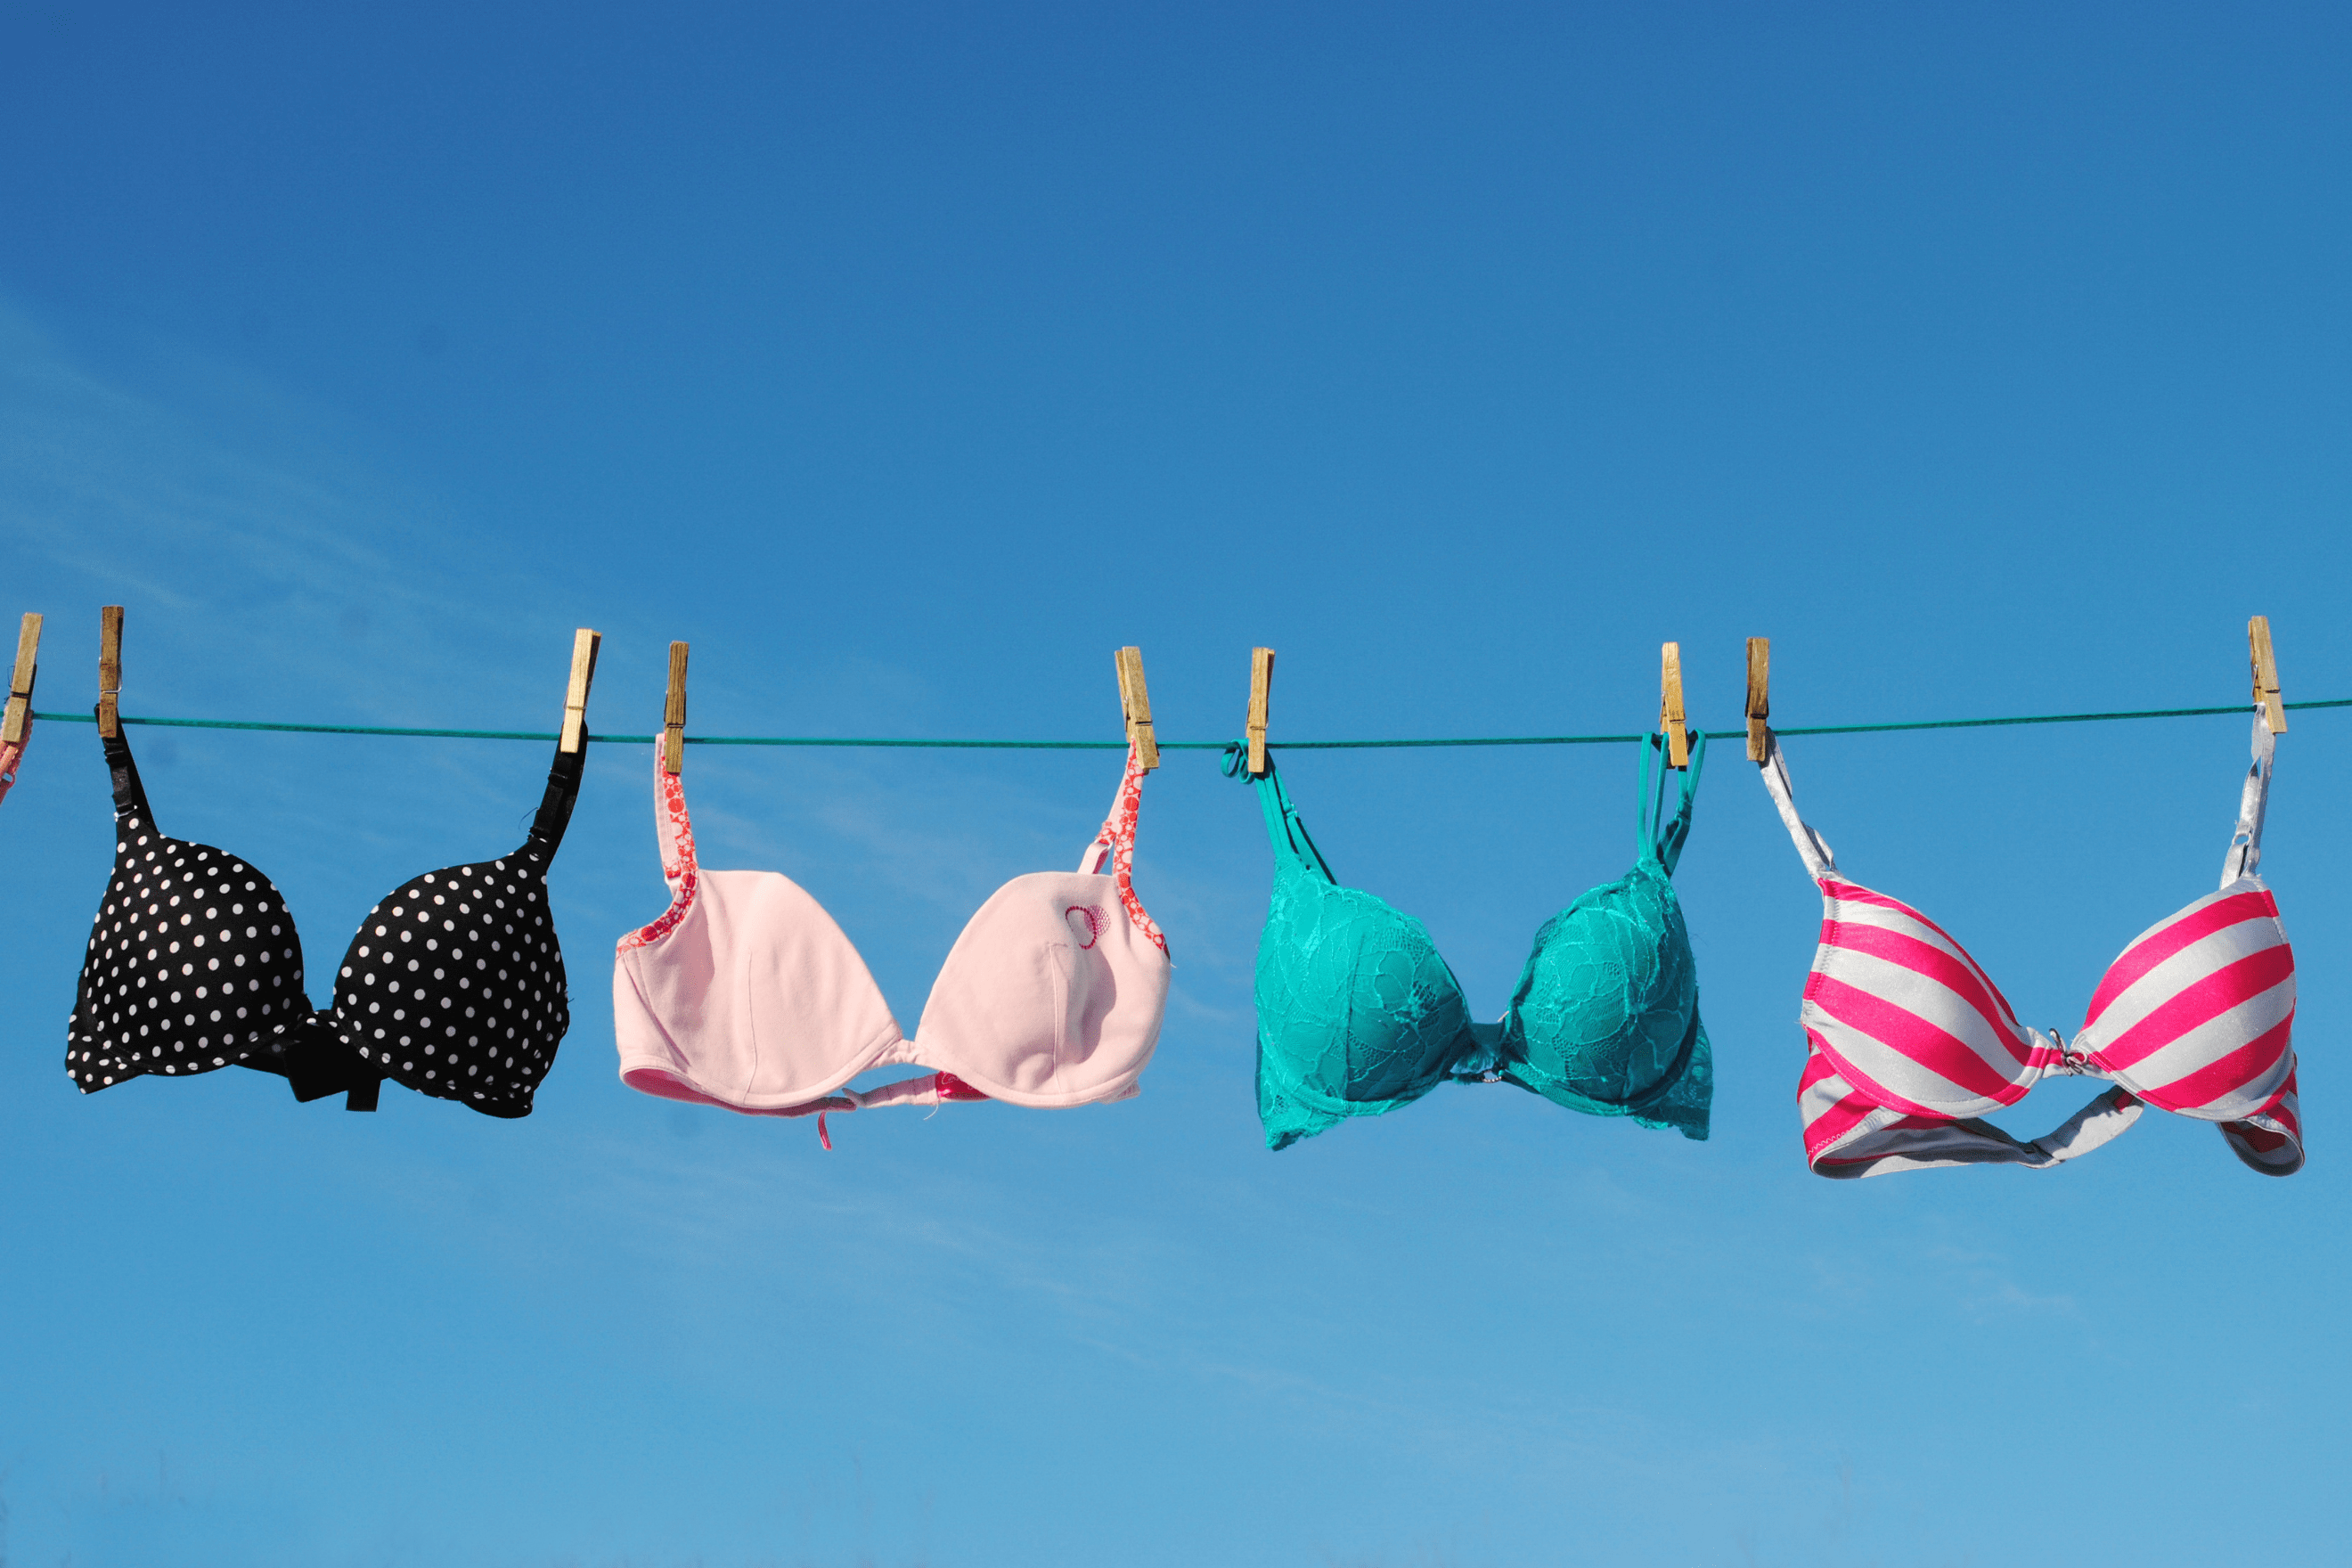 A Guide to Ethical + Organic Bras (and Bralettes)